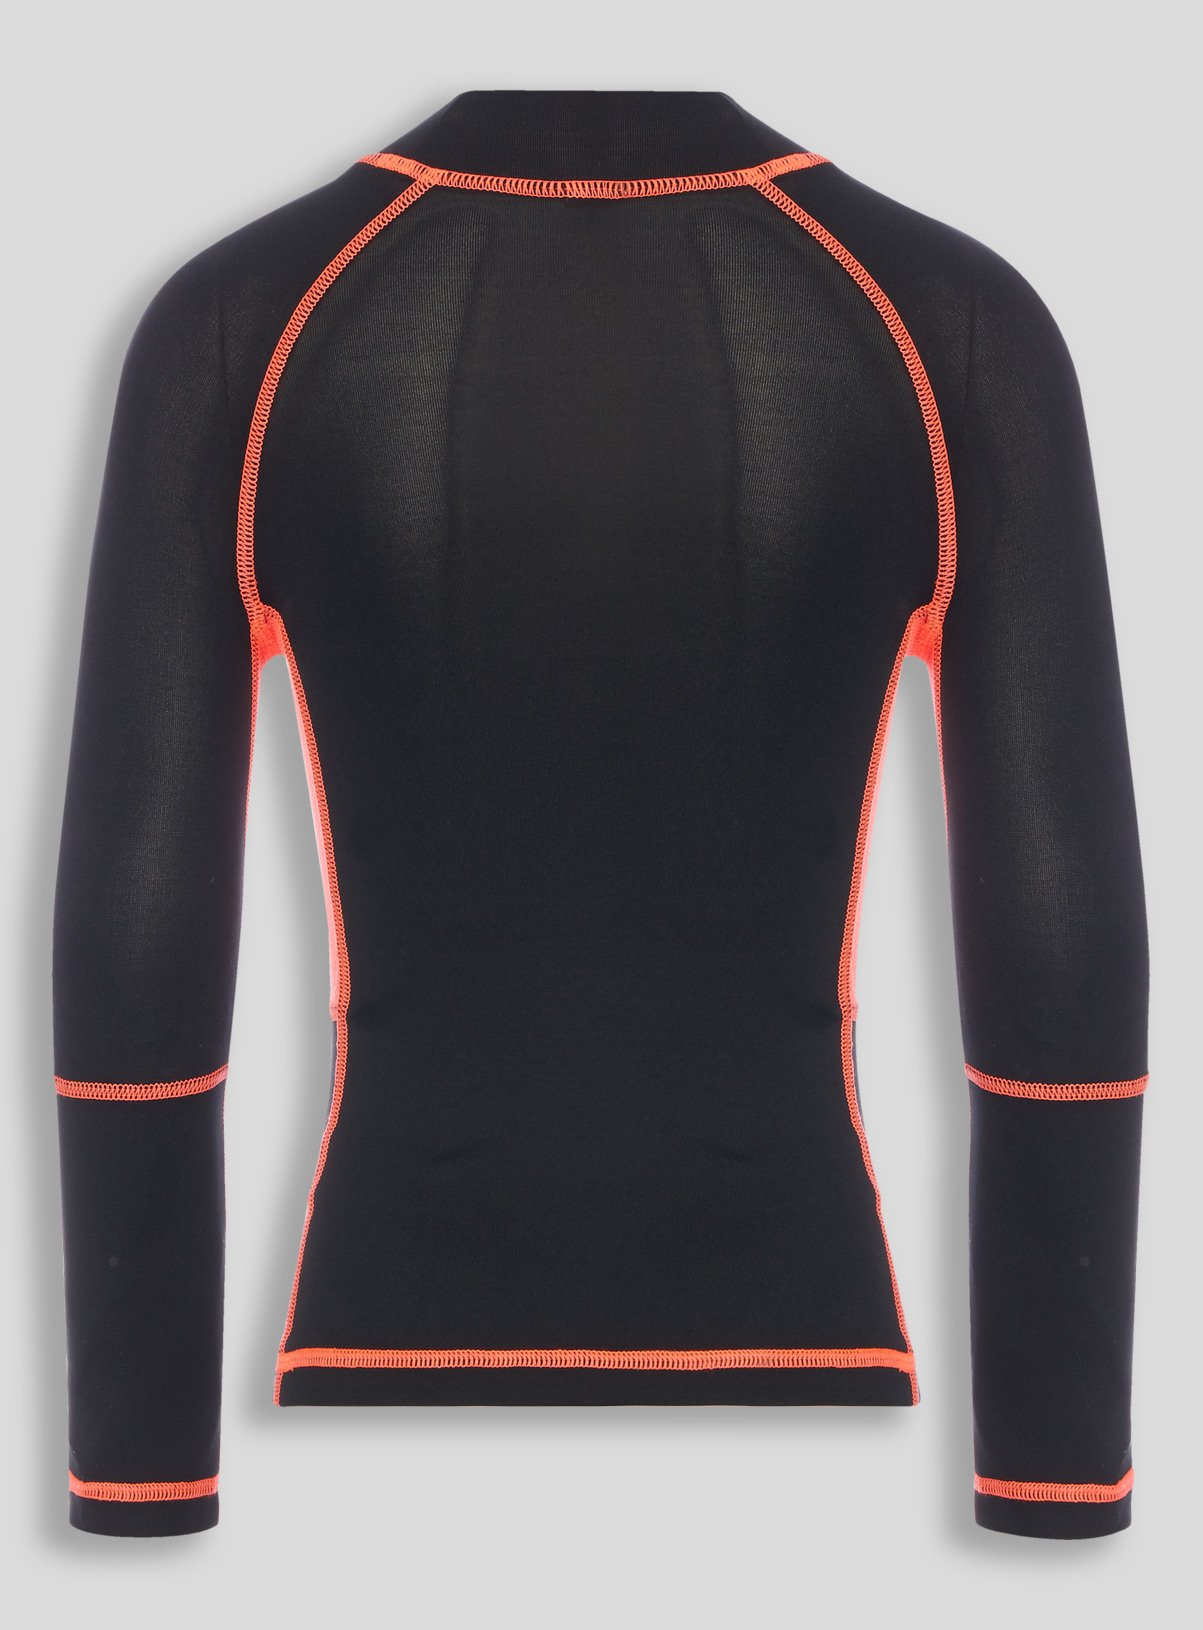 Active Black Sports Top Review